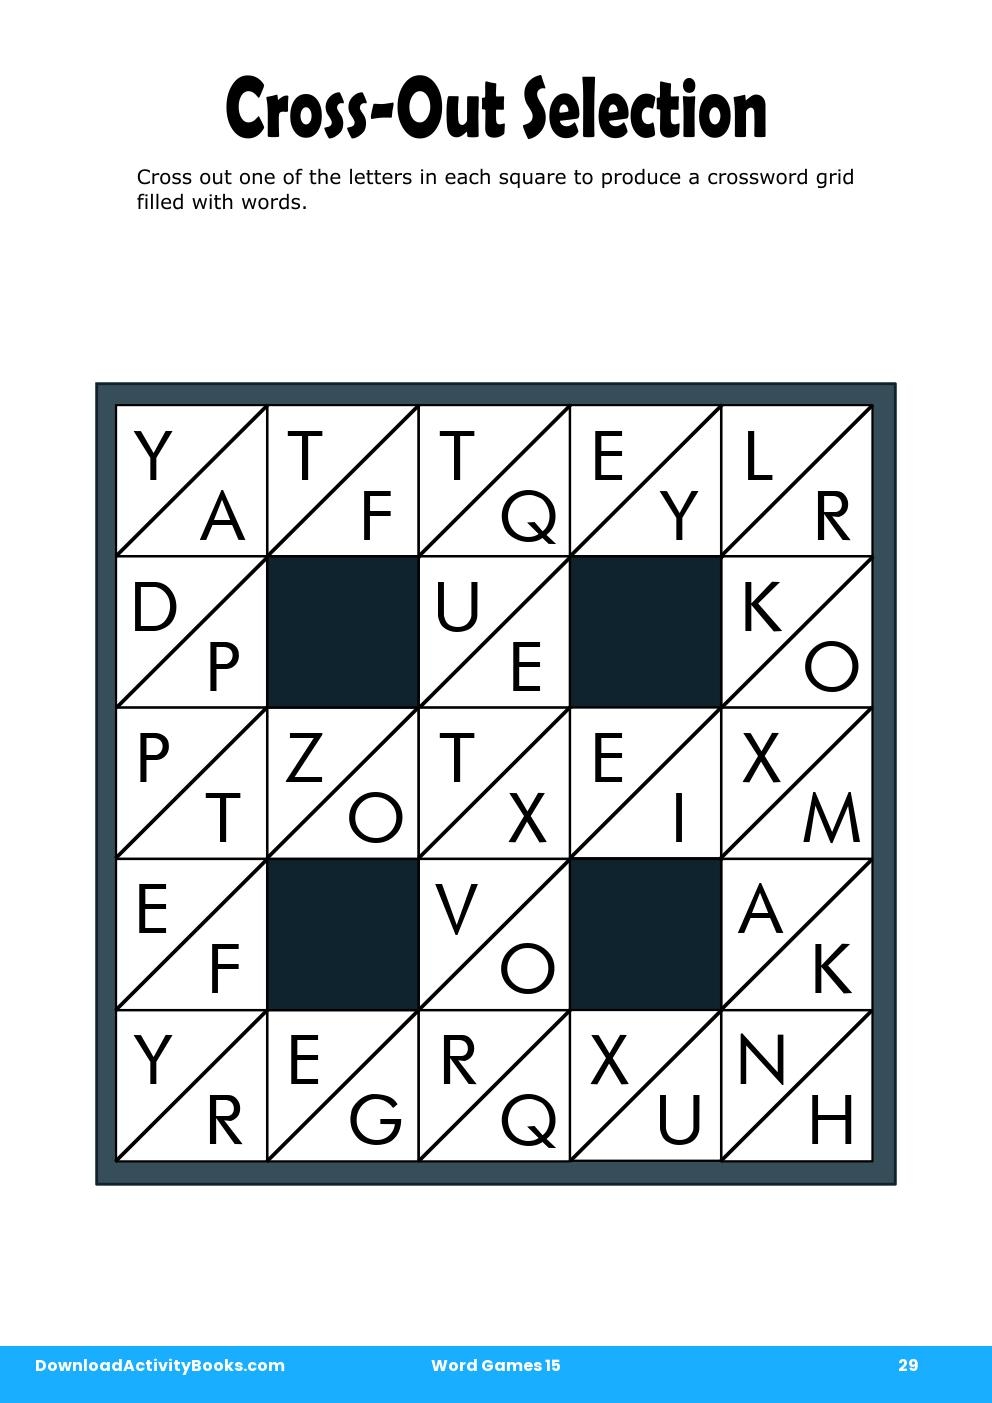 Cross-Out Selection in Word Games 15